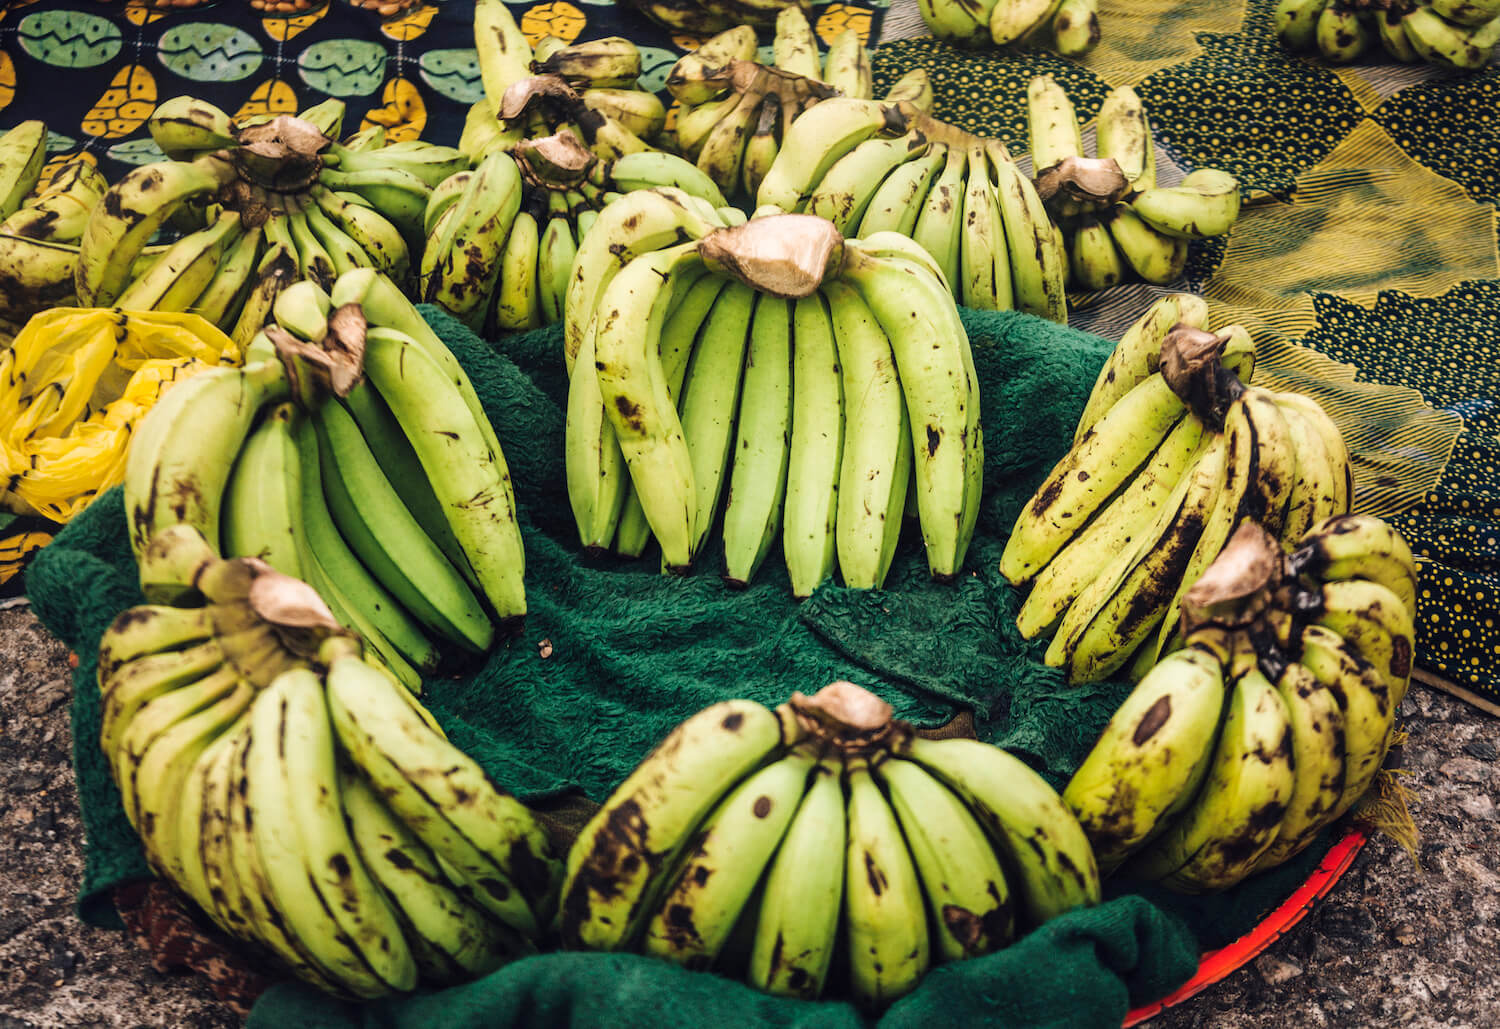 Plantains for sale in Lagos, Nigeria. January 2022